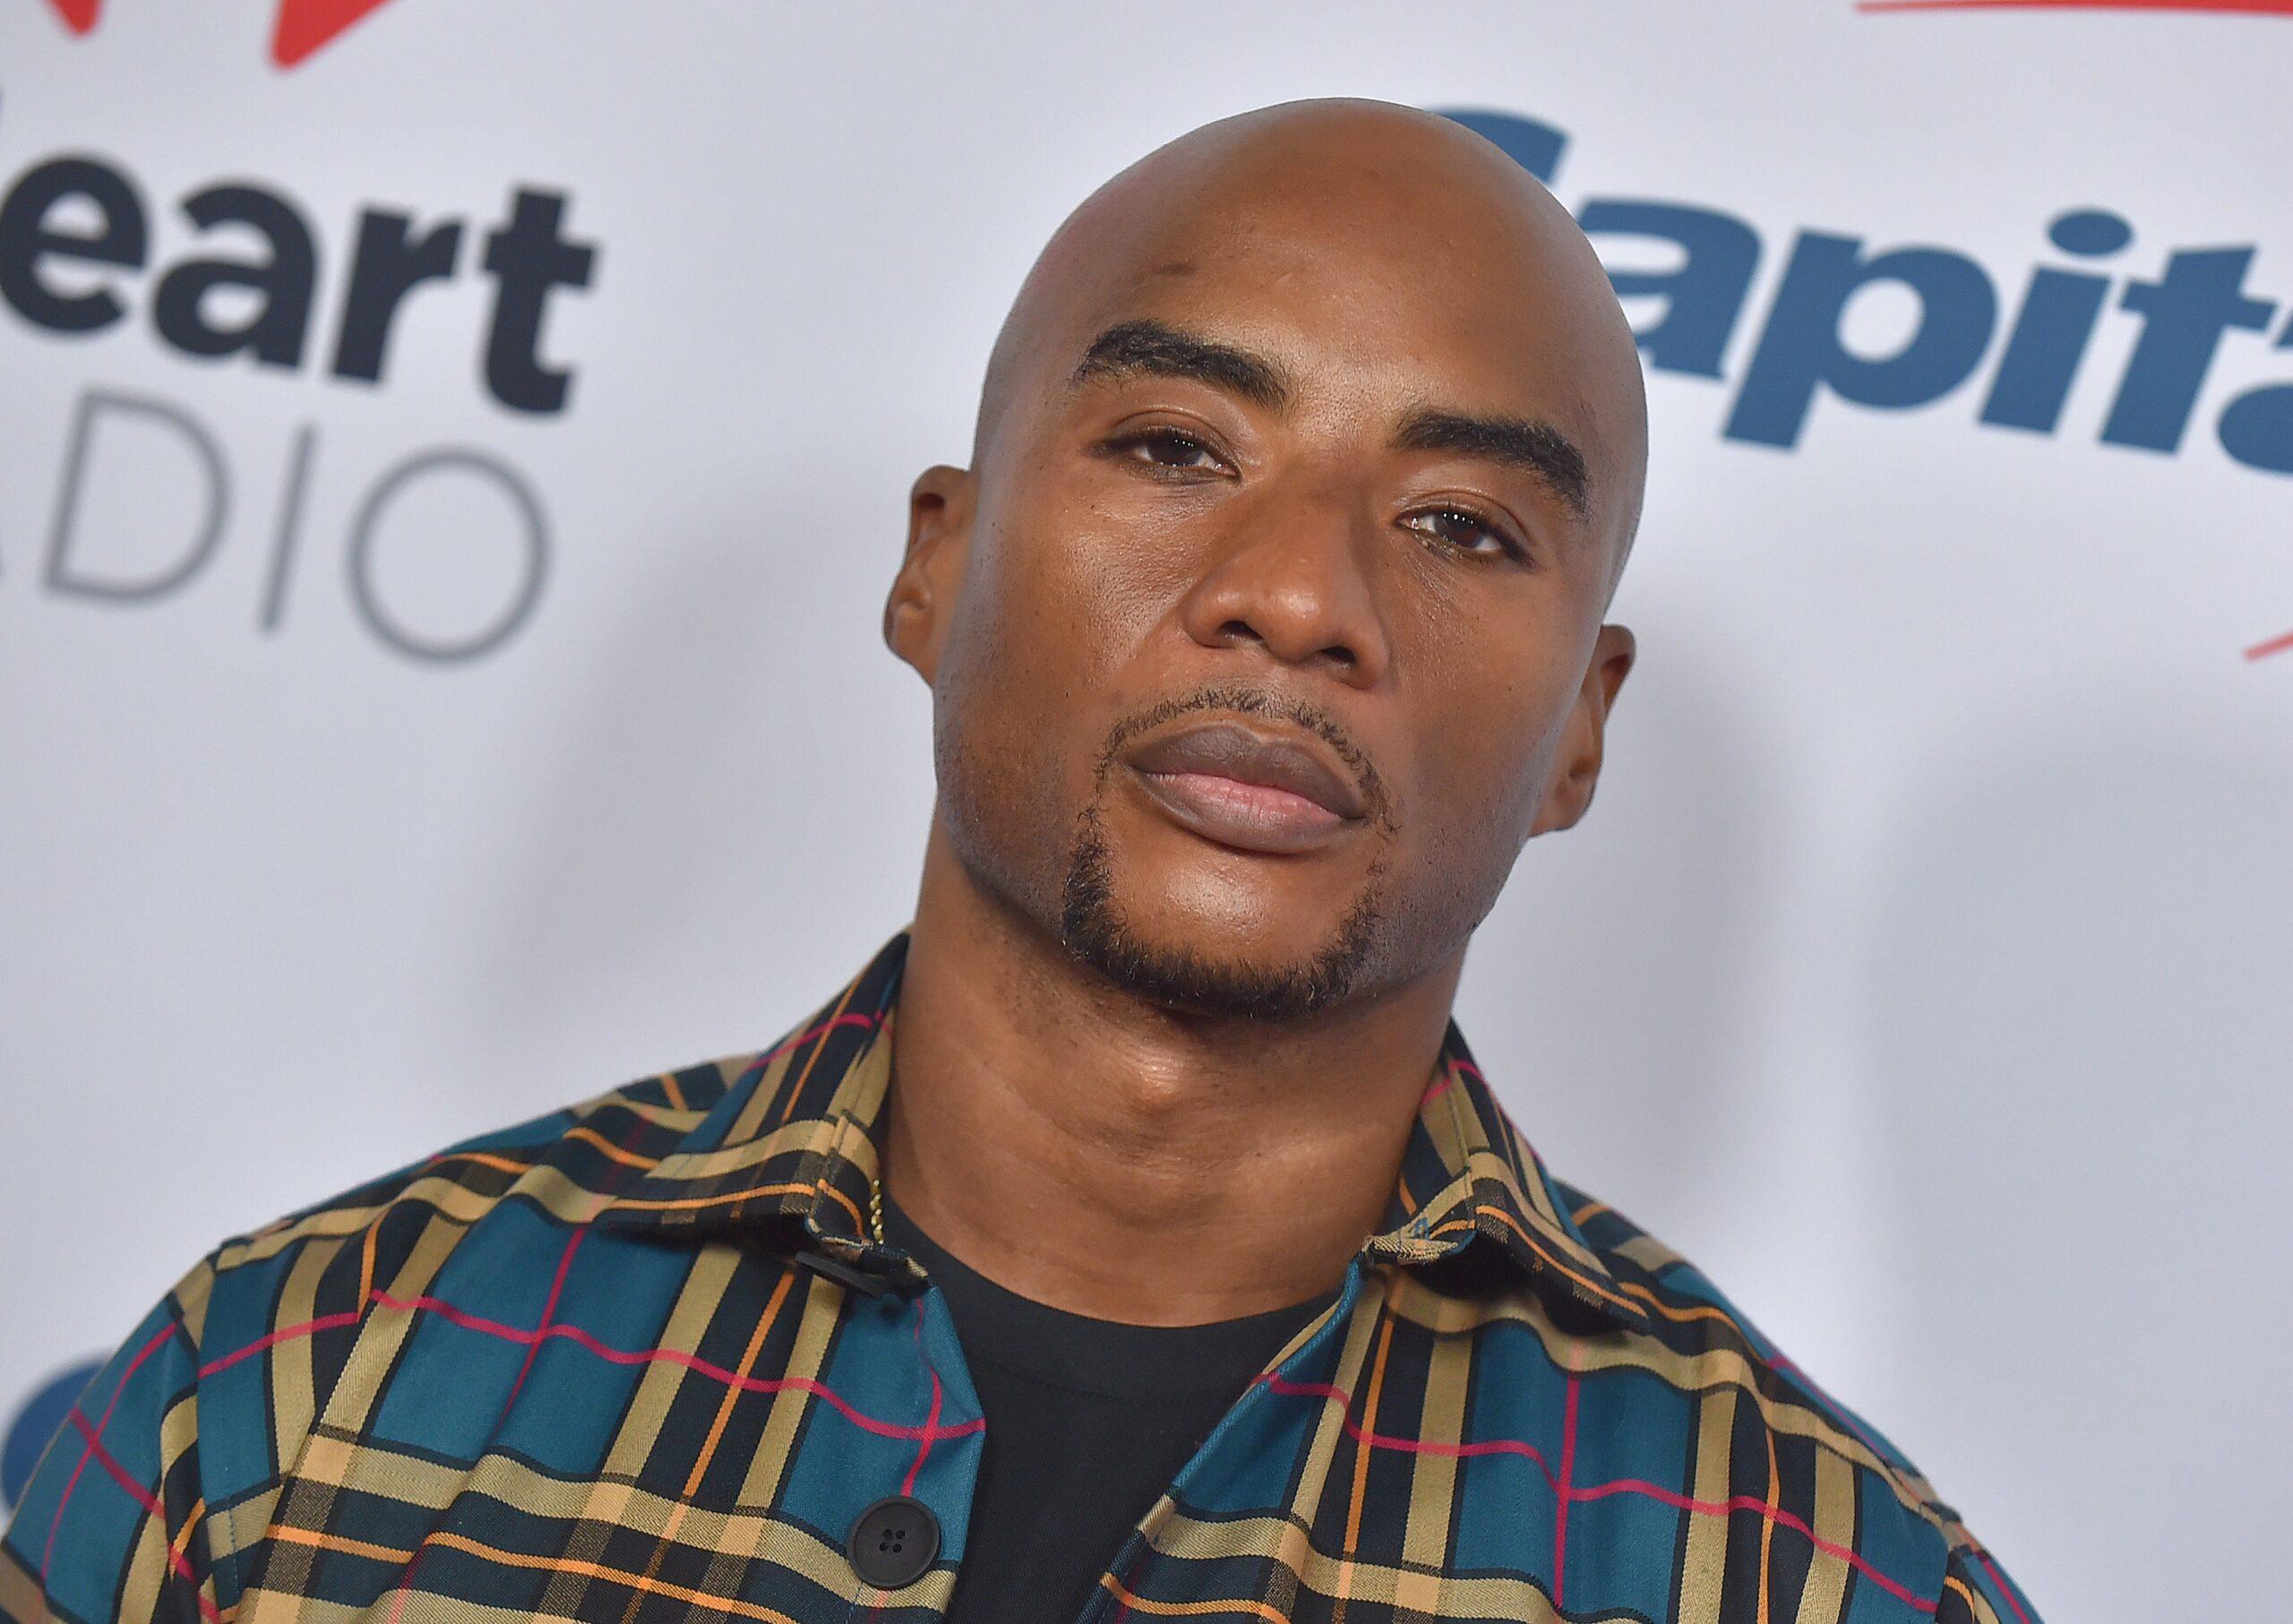 2019 iHeartRadio Podcast Awards held at the iHeartRadio Theater Los Angeles on January 18, 2019 in Burbank, CA. © O'Connor/AFF-USA.com. 18 Jan 2019 Pictured: Charlamagne tha God.